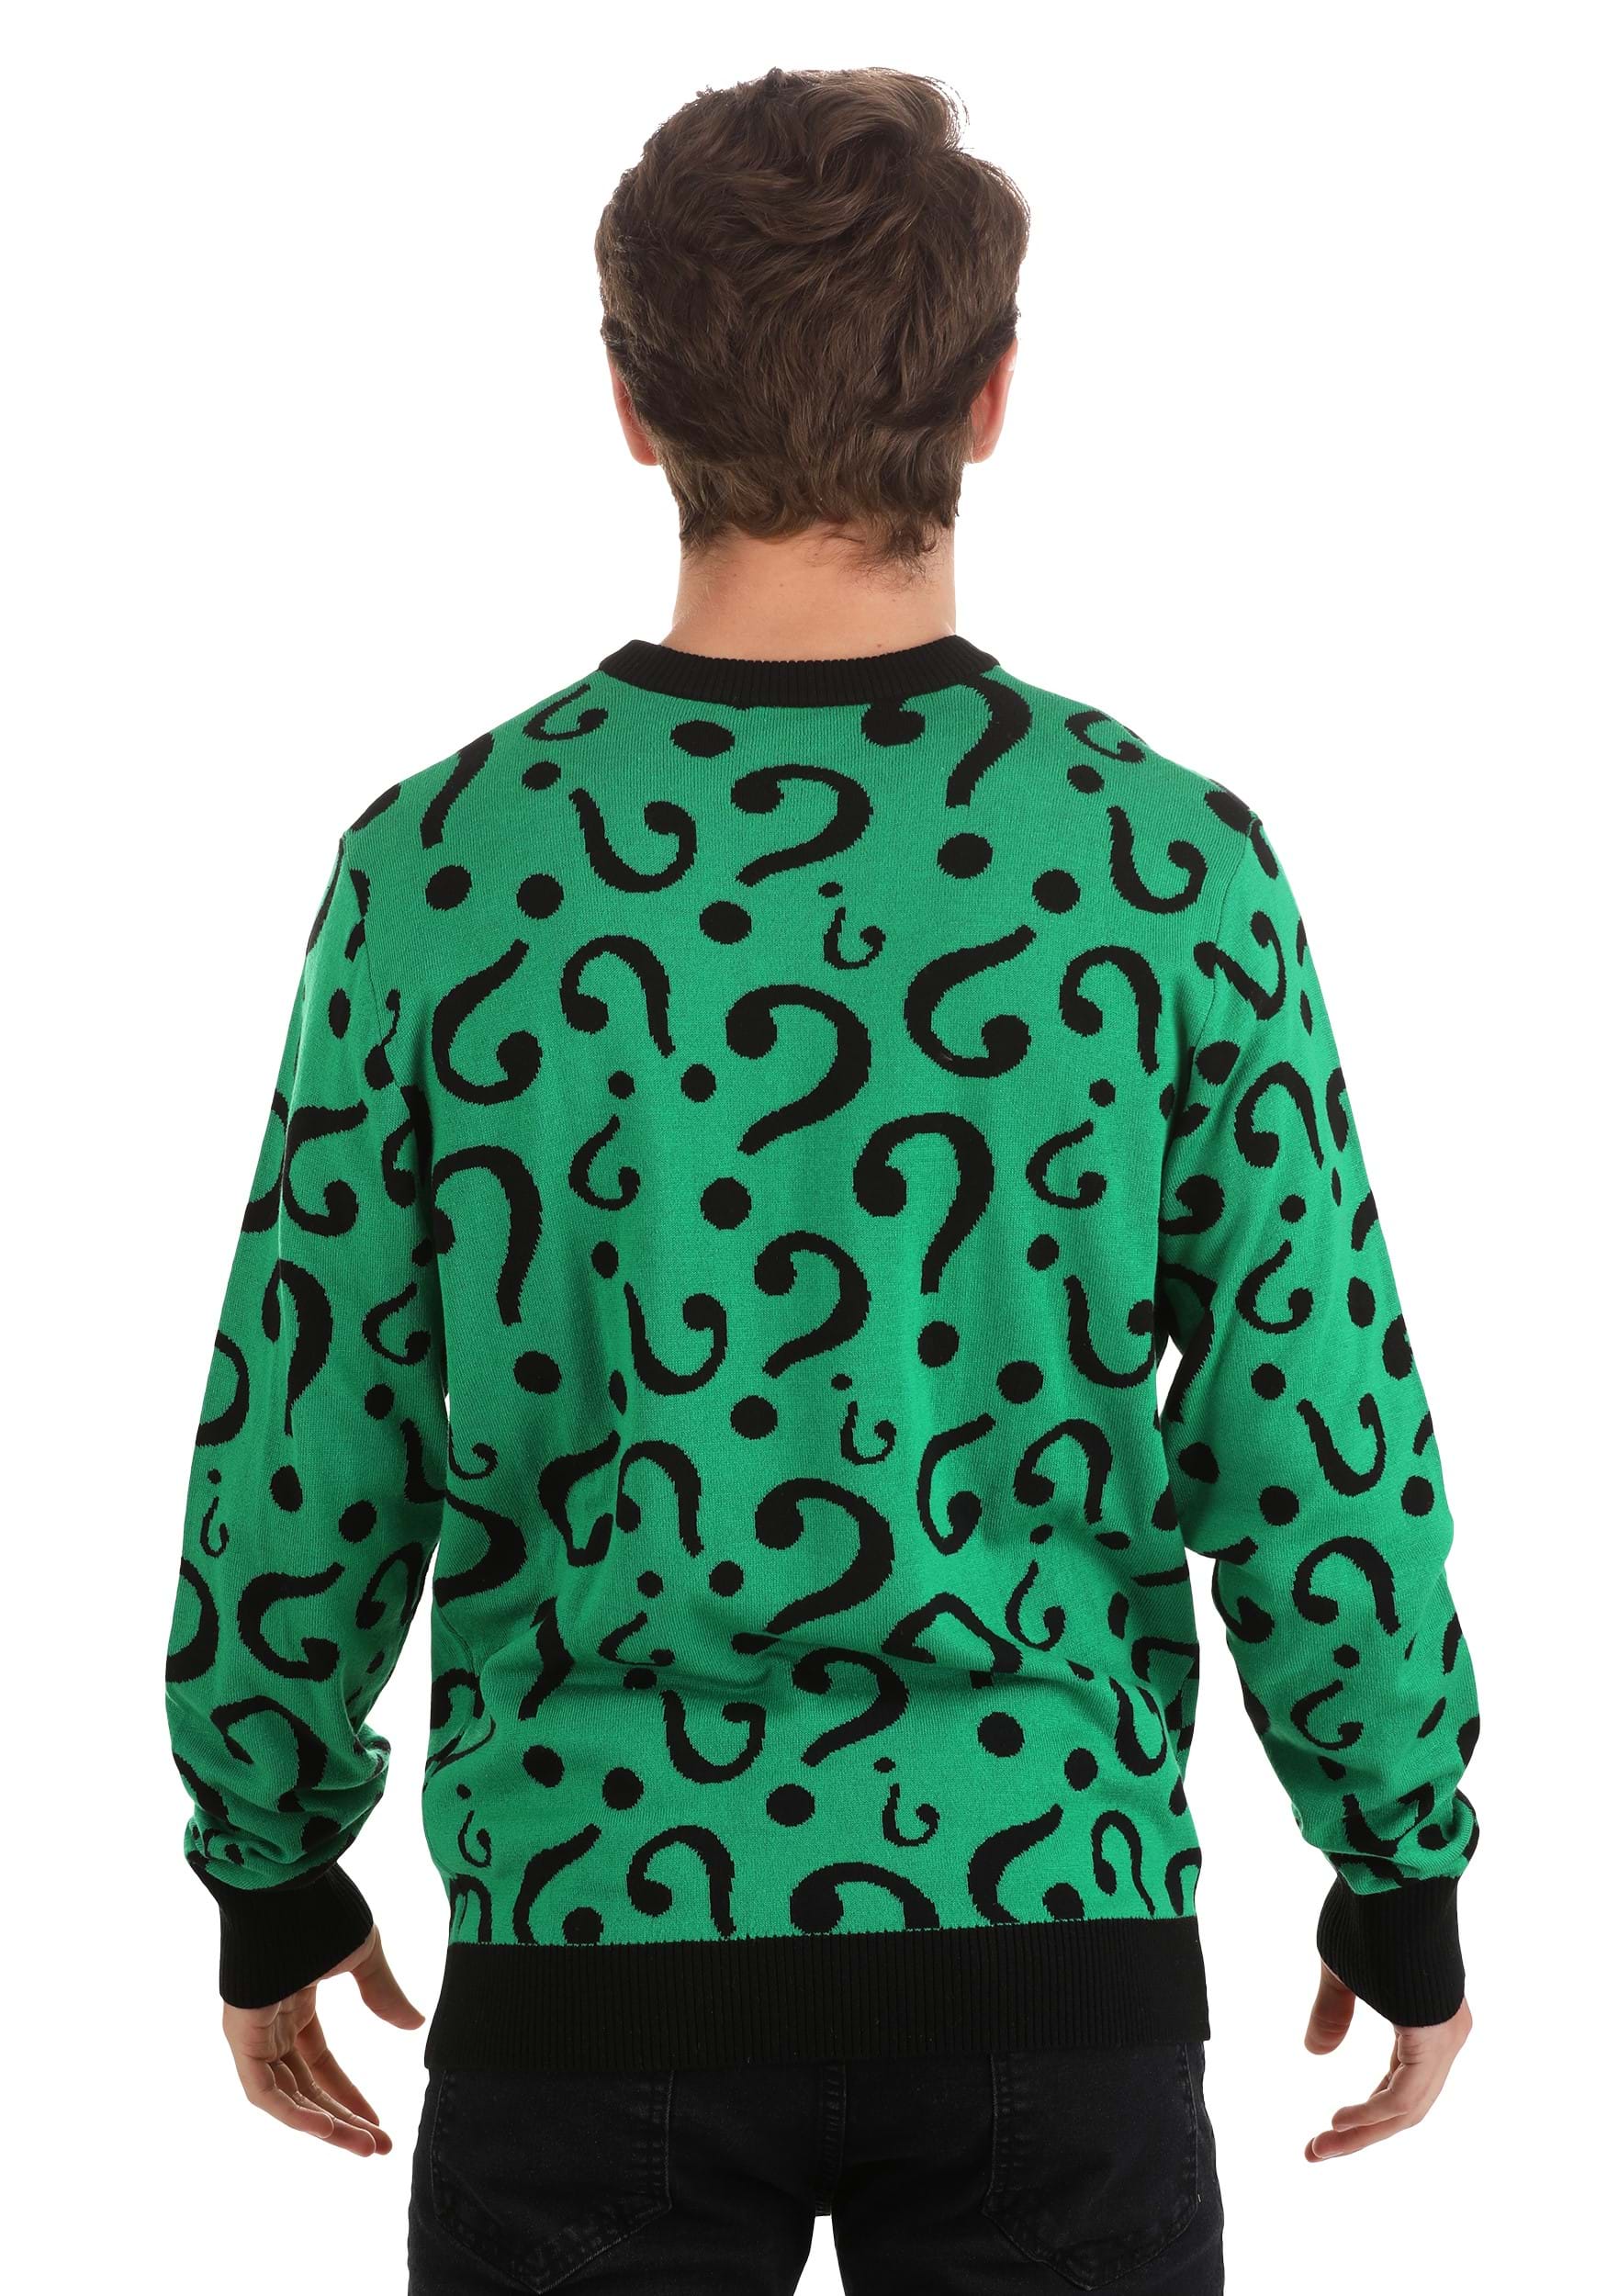 The Riddler Adult Ugly Christmas Sweater